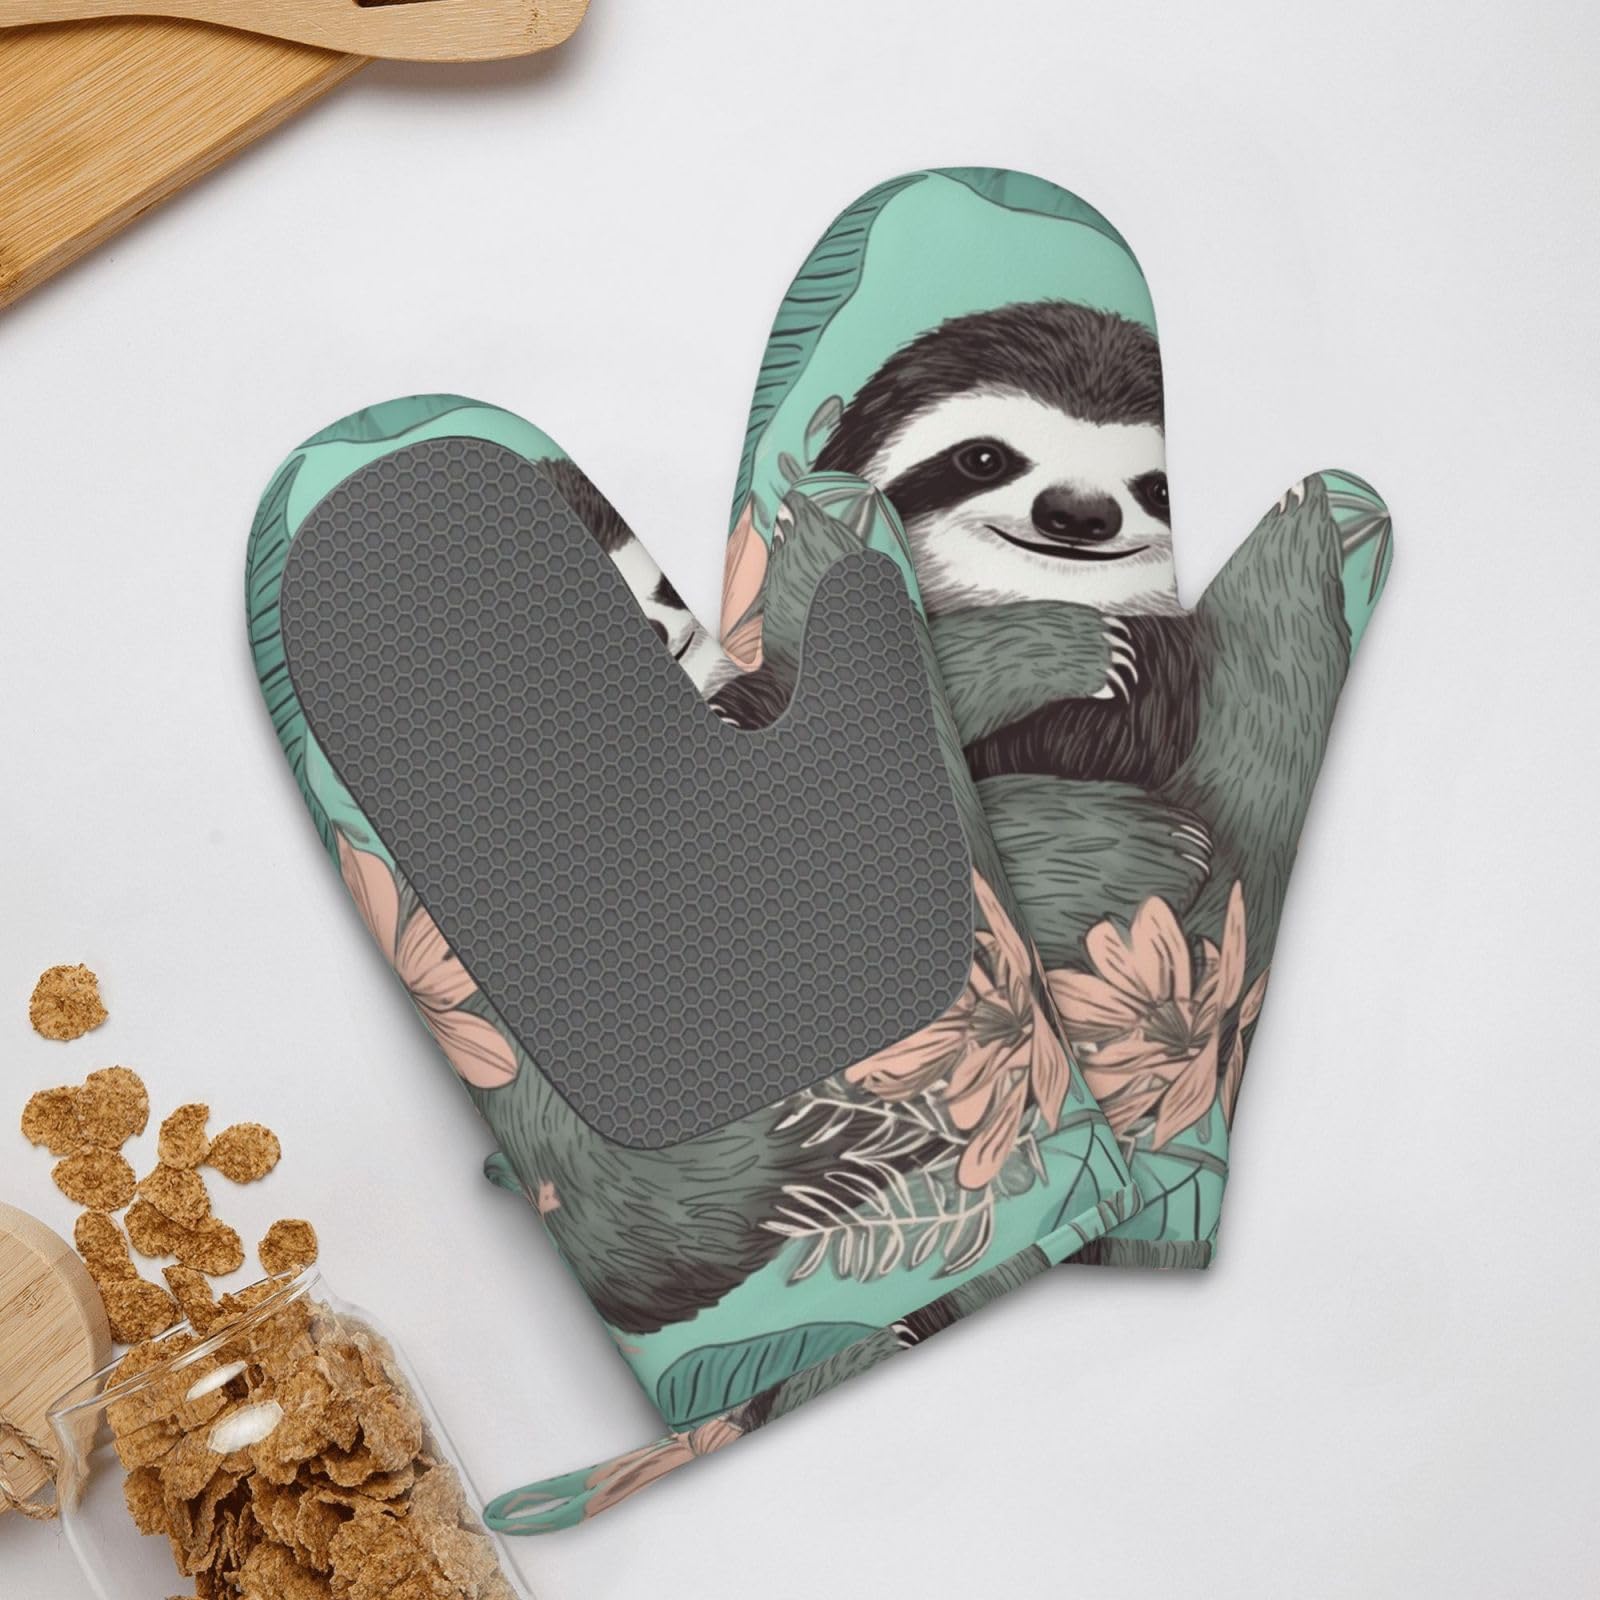 Animal Sloth Mint Green Printed Oven Mitts Heat Resistant Oven Gloves Non-Slip Silicone Kitchen Gloves for Cooking Baking BBQ Gloves 1 Pair